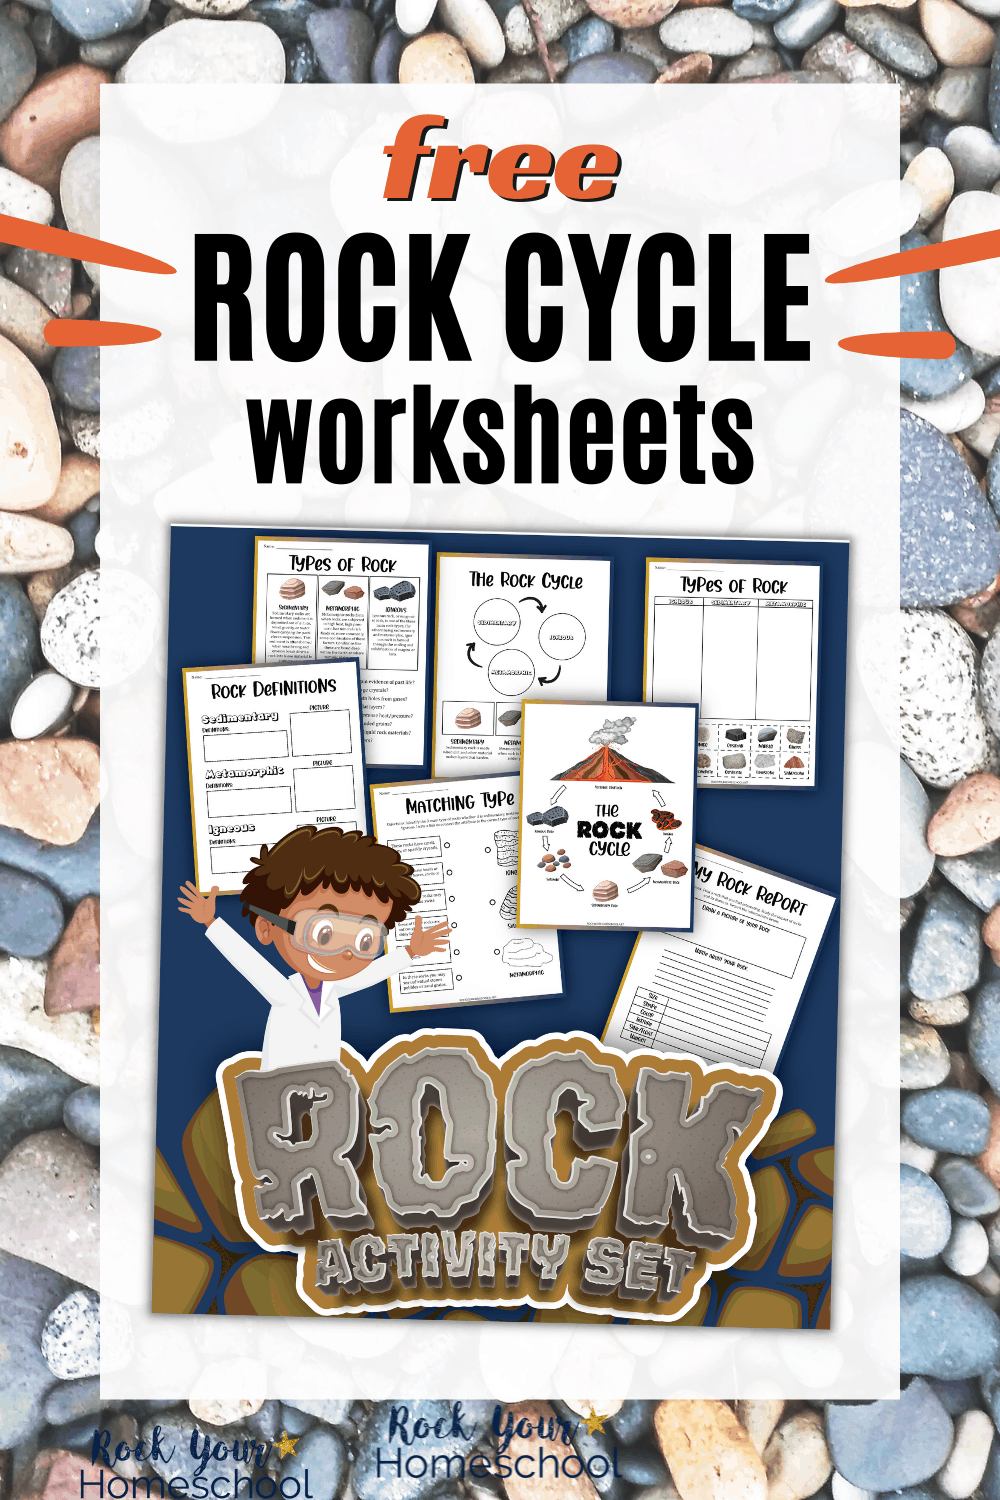 Free Rock Cycle Worksheets for Simple Science Fun for Your Kids Throughout Rock Cycle Worksheet Middle School